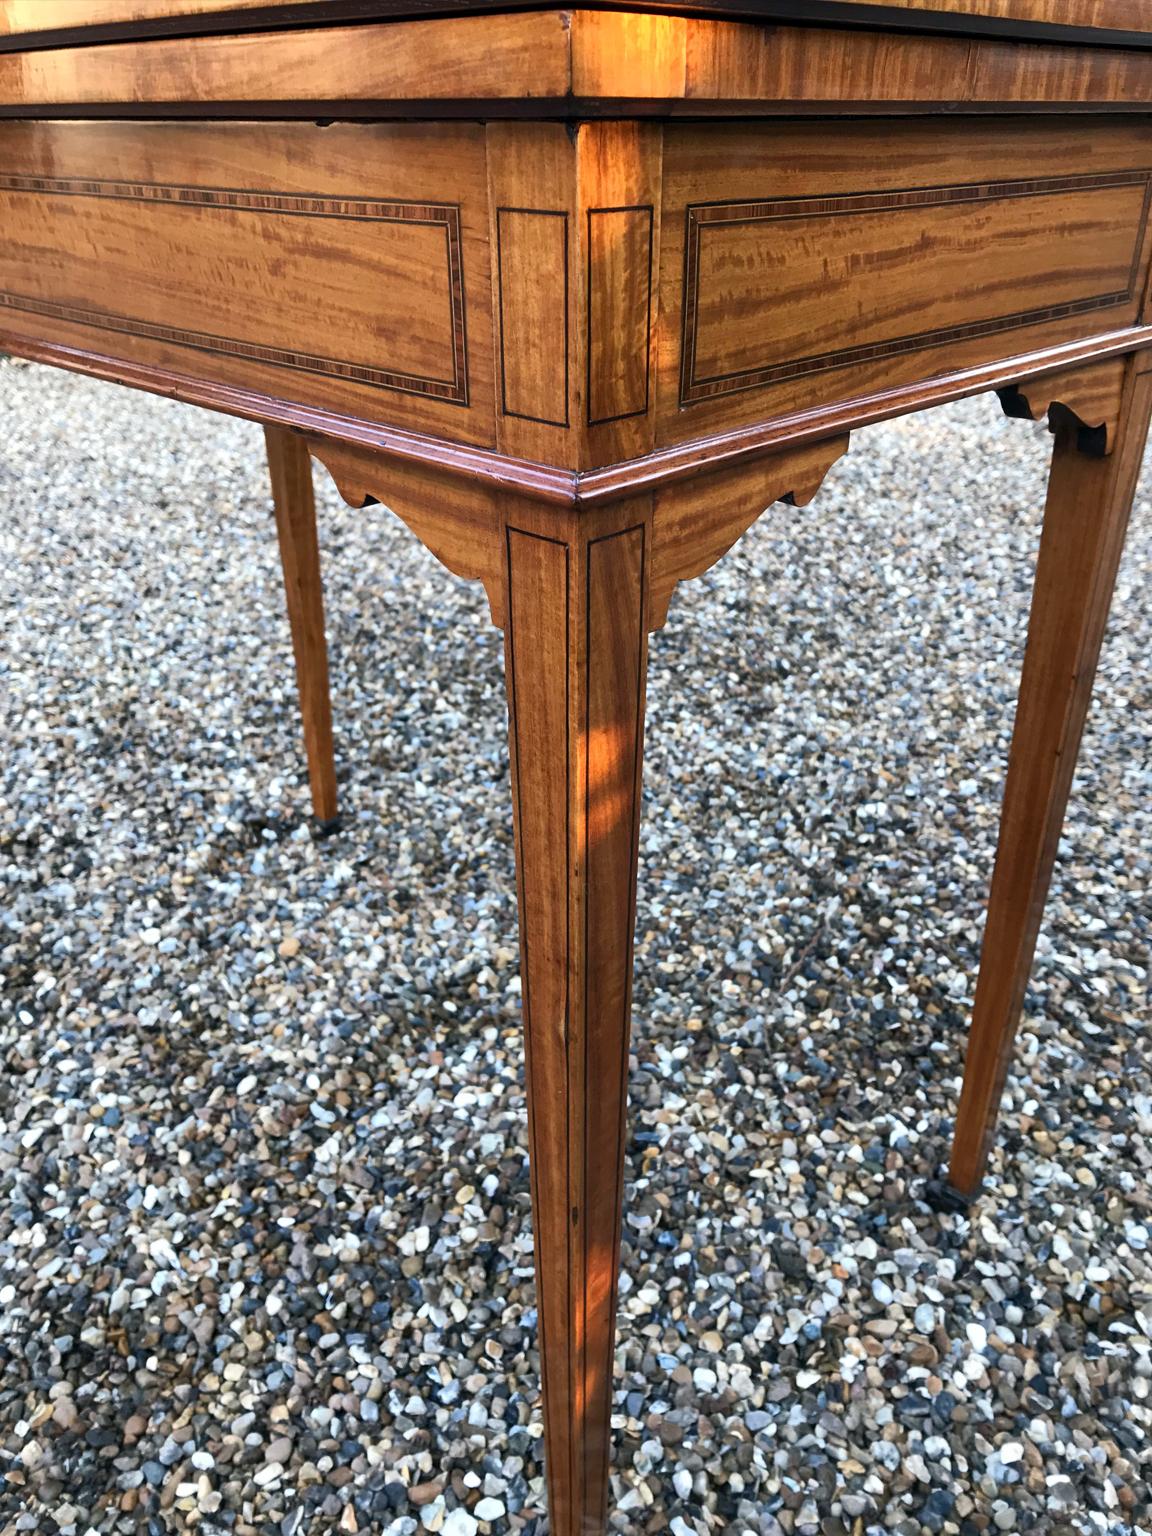 19th Century Satinwood Card Table In Good Condition For Sale In Richmond, London, Surrey